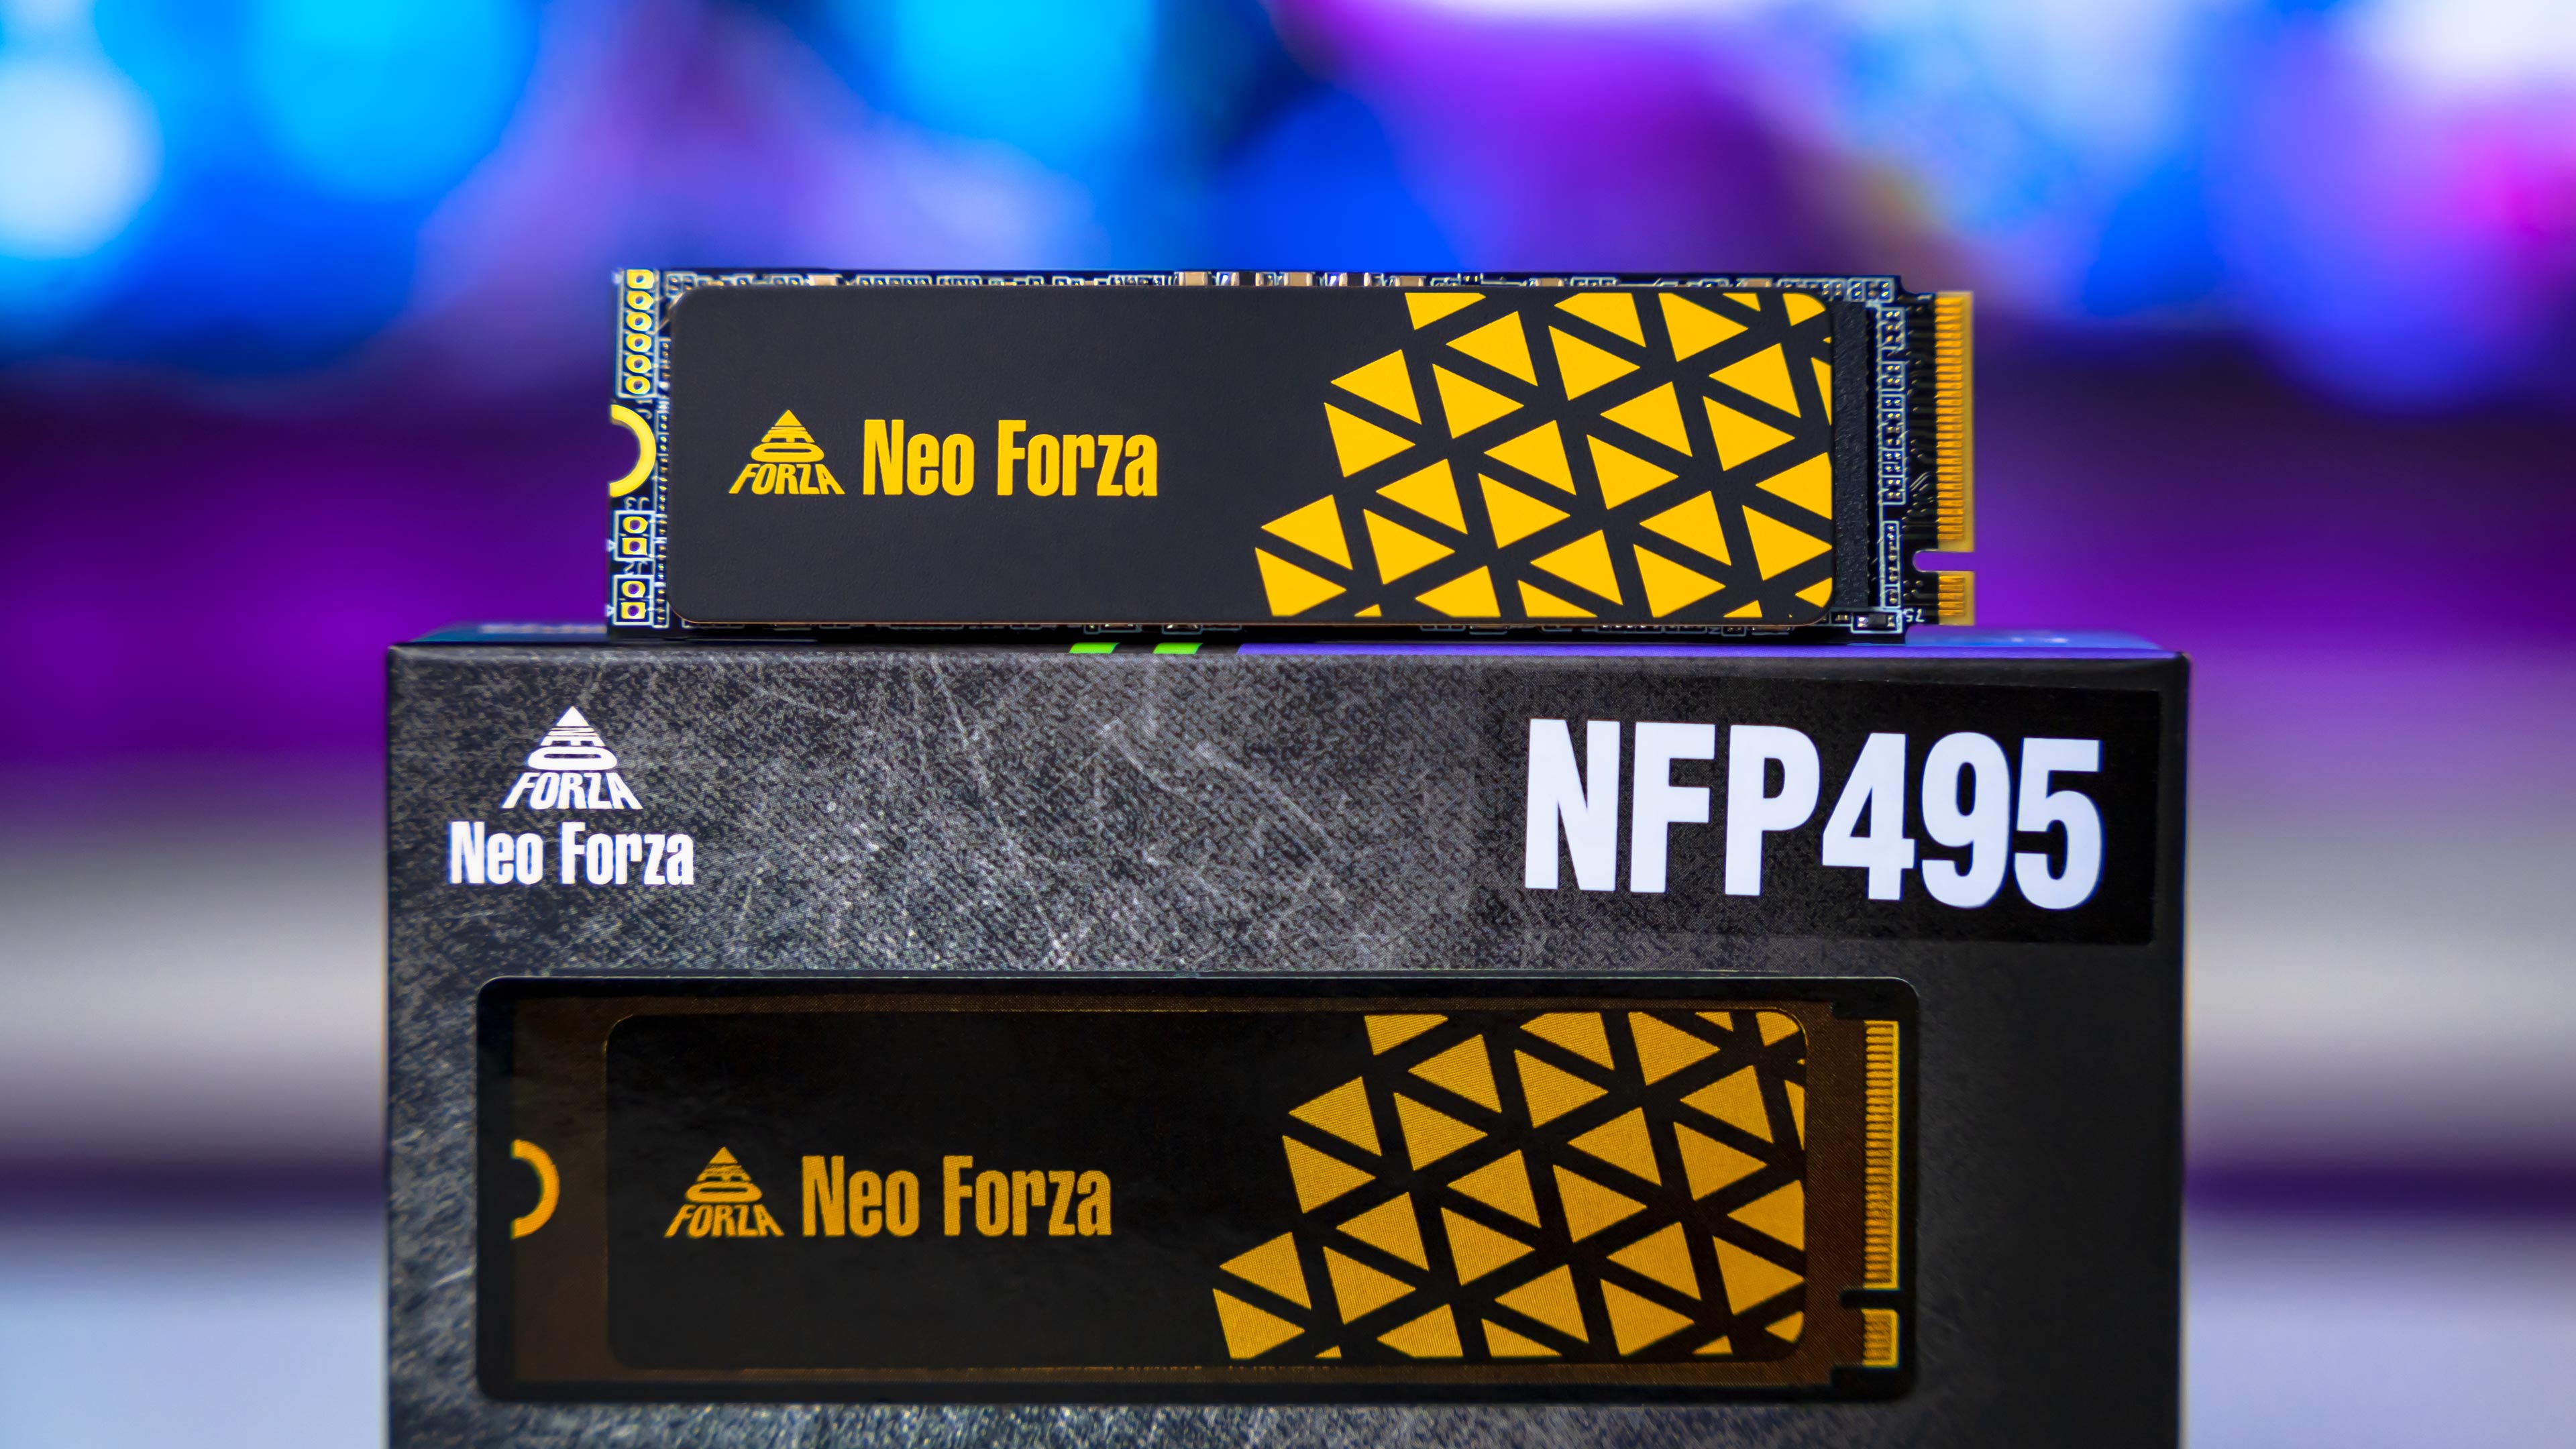 Neo Forza NFP495 4TB